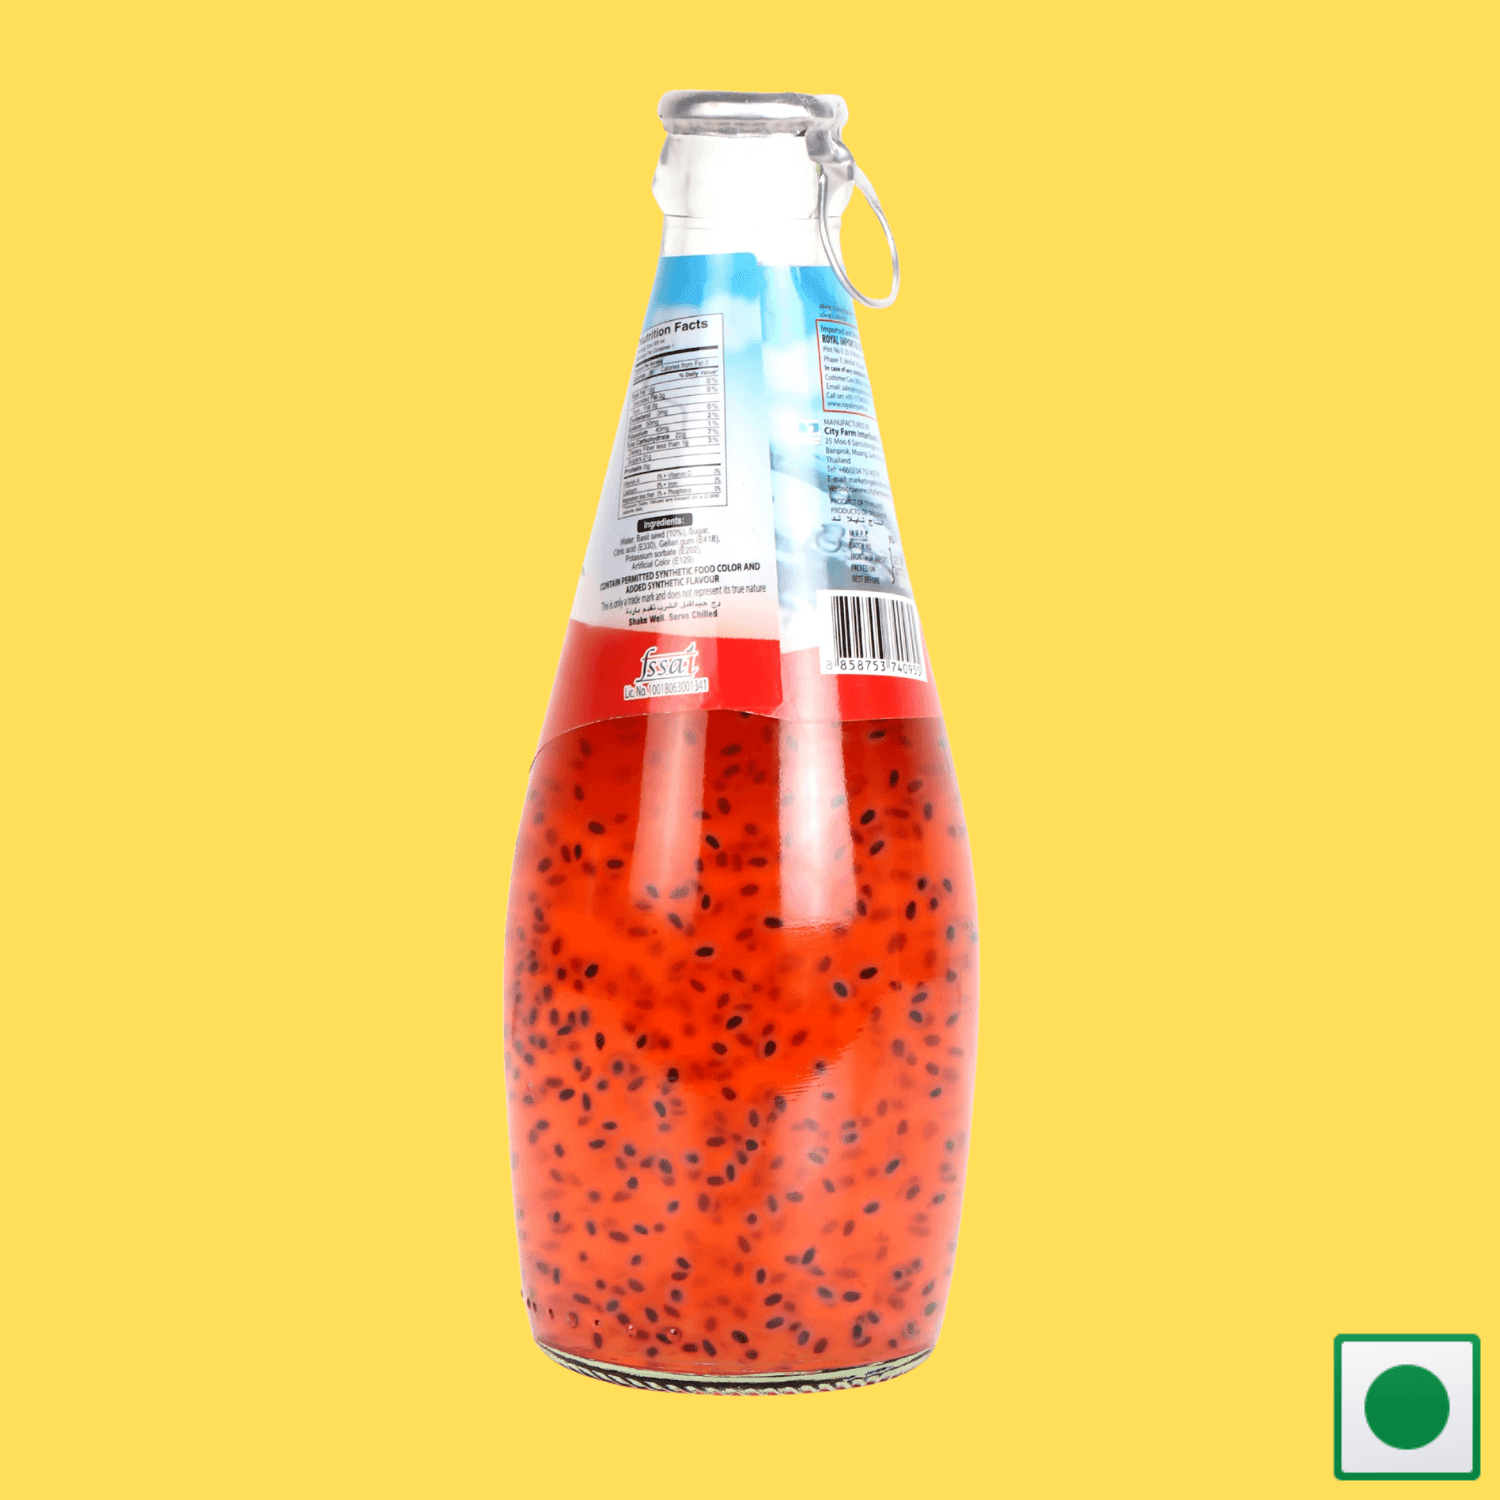 CITY FRESH STRAWBERRY BASIL SEED DRINK 300ML (Imported) - Super 7 Mart